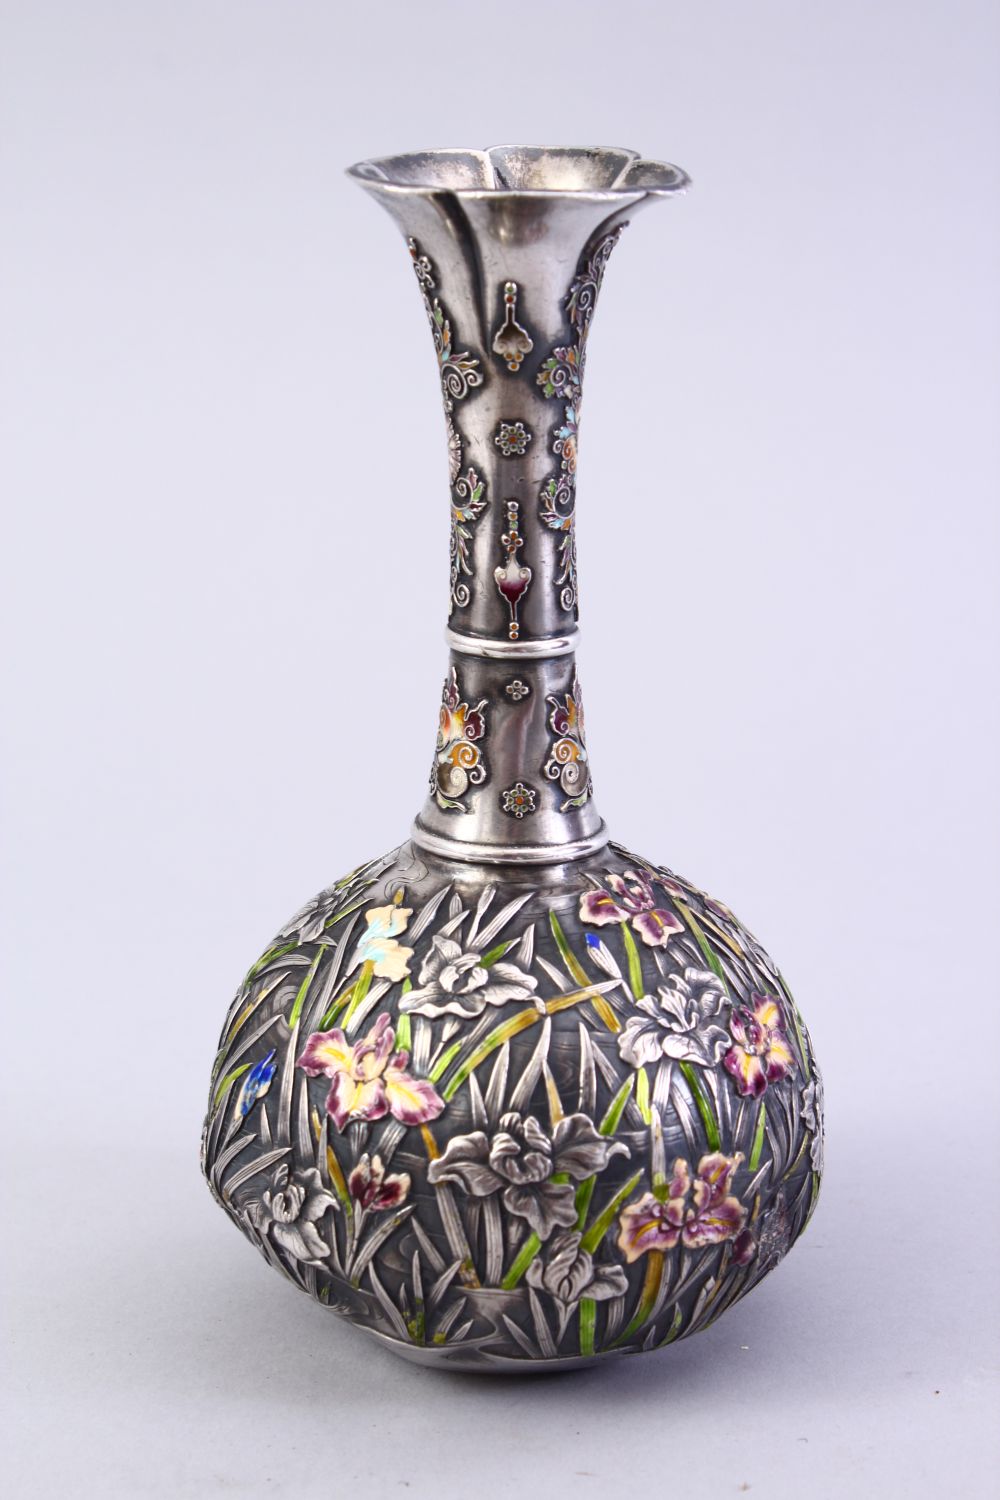 A GOOD JAPANESE MEIJI PERIOD SILVER & ENAMEL BOTTLE VASE, the vase with iris and other floral - Image 2 of 9